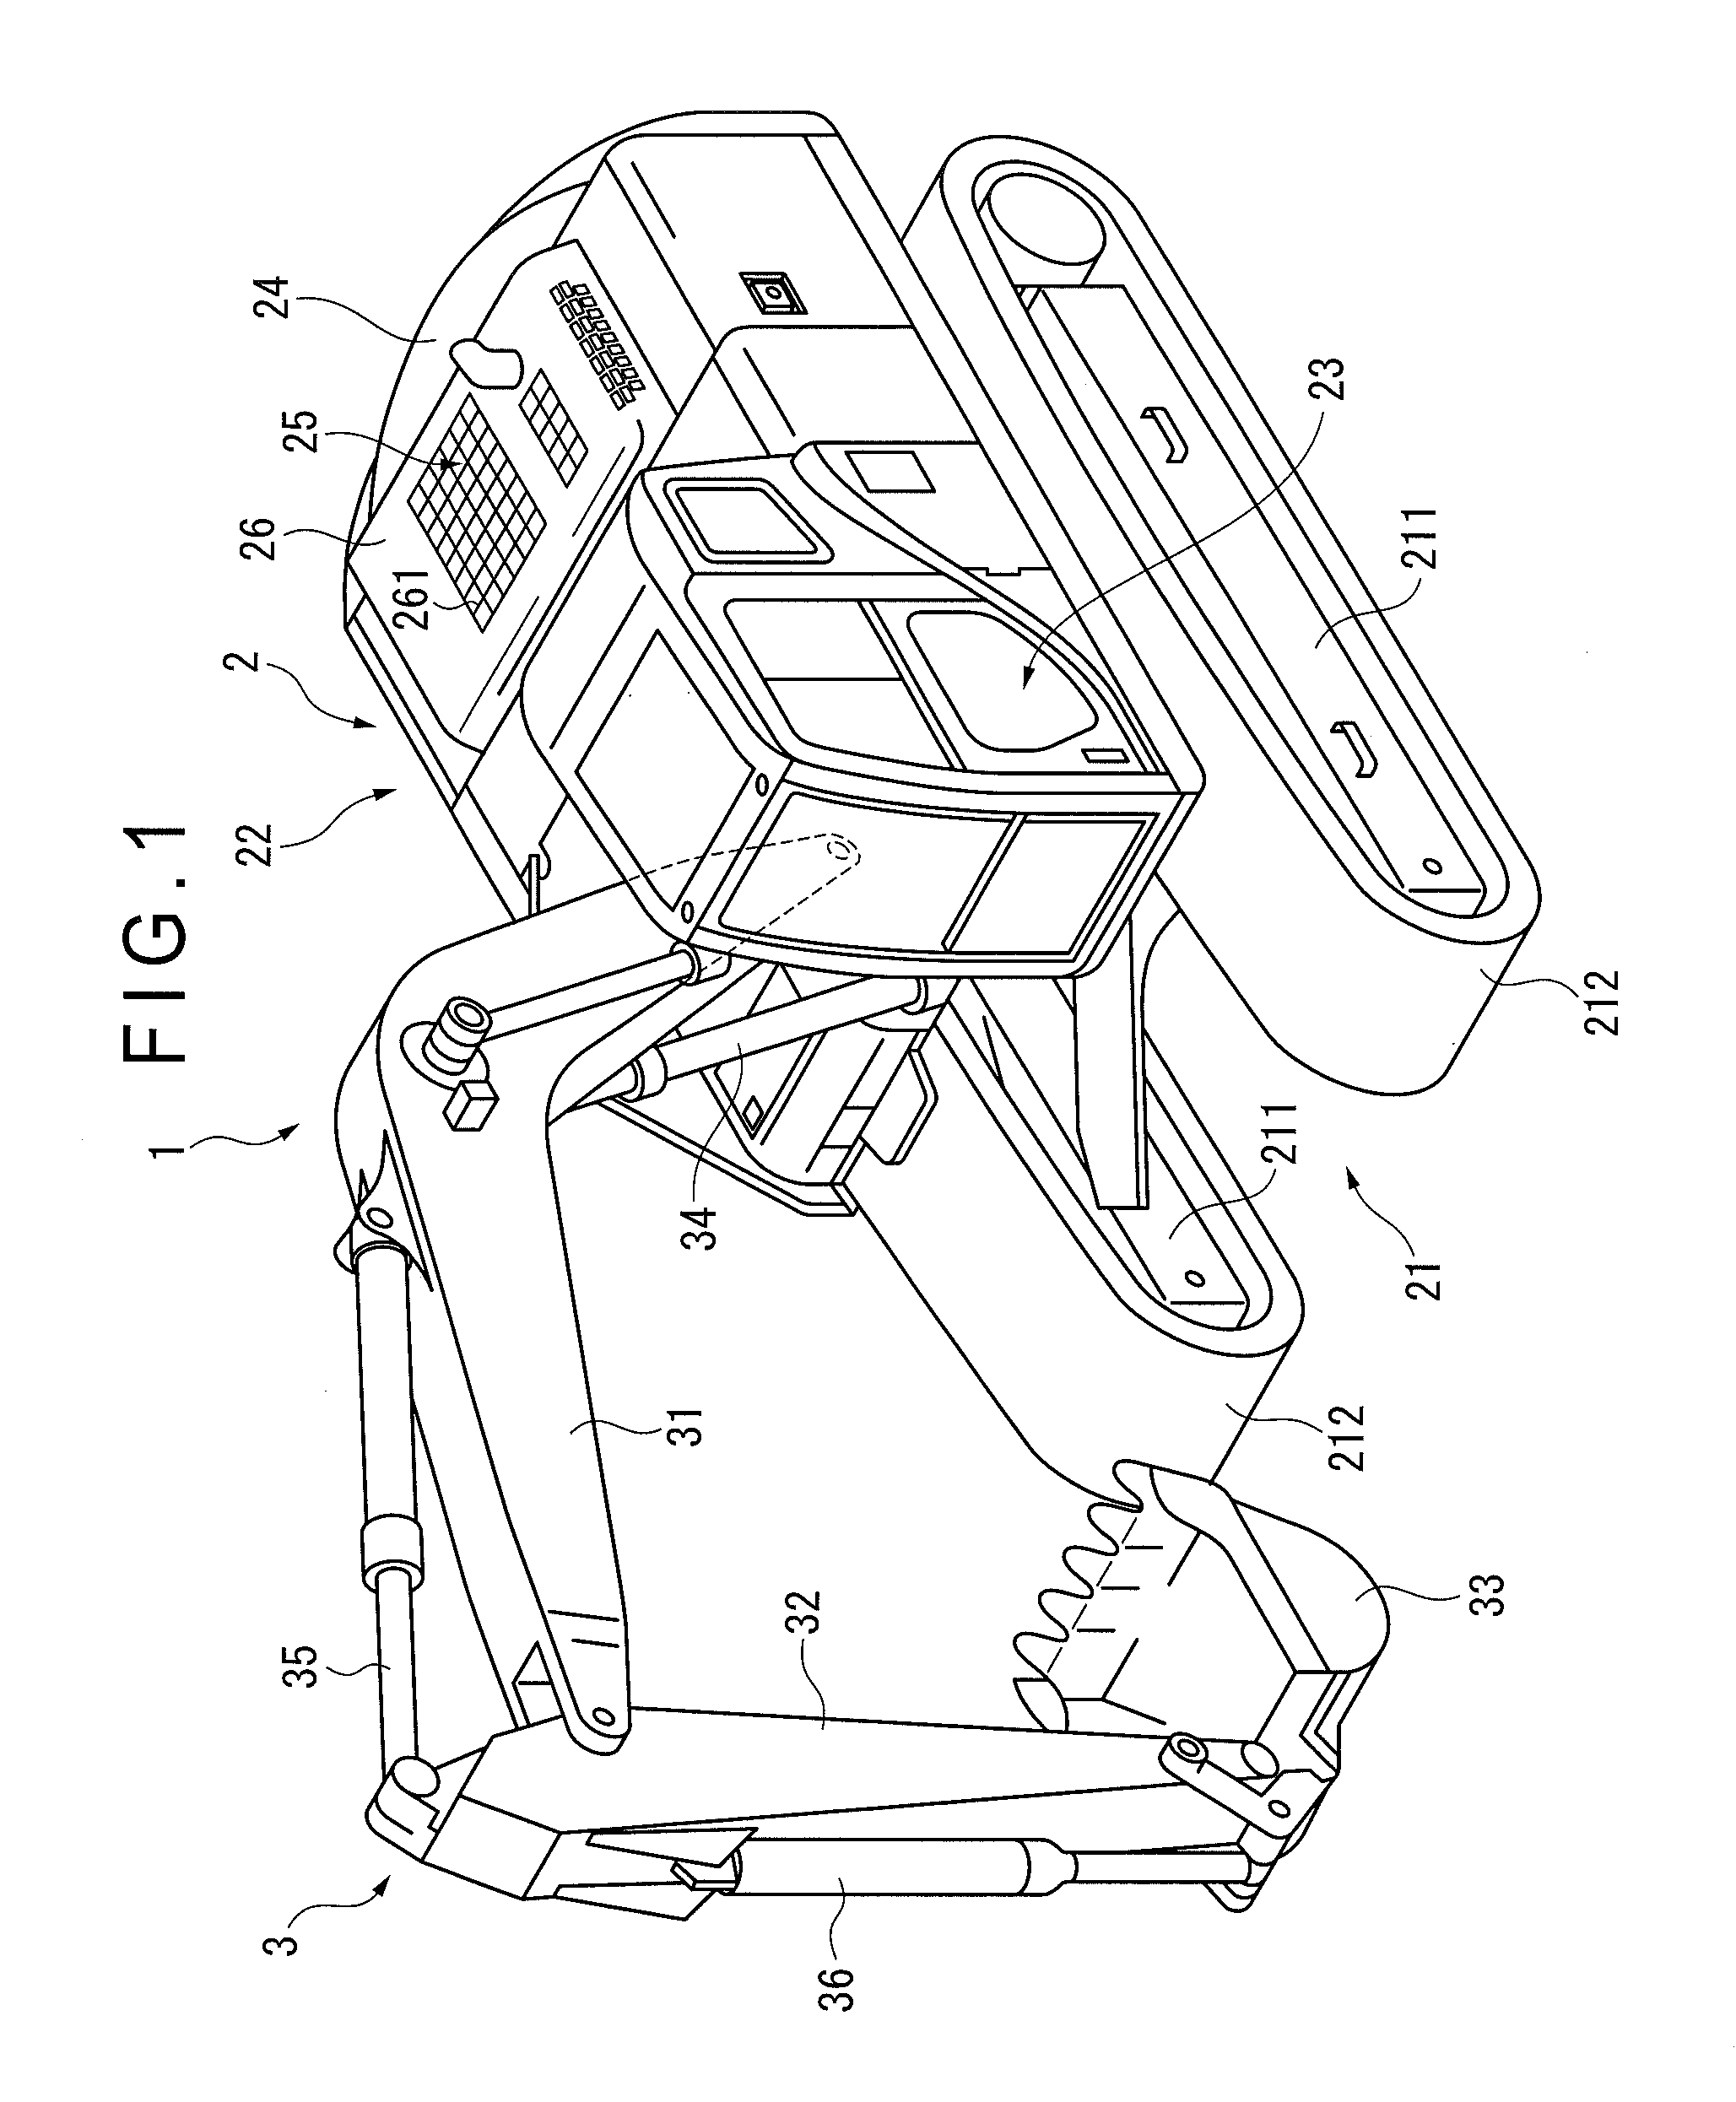 Hybrid Work Machine and Method of Controlling Auto-Stop of Engine for the Same